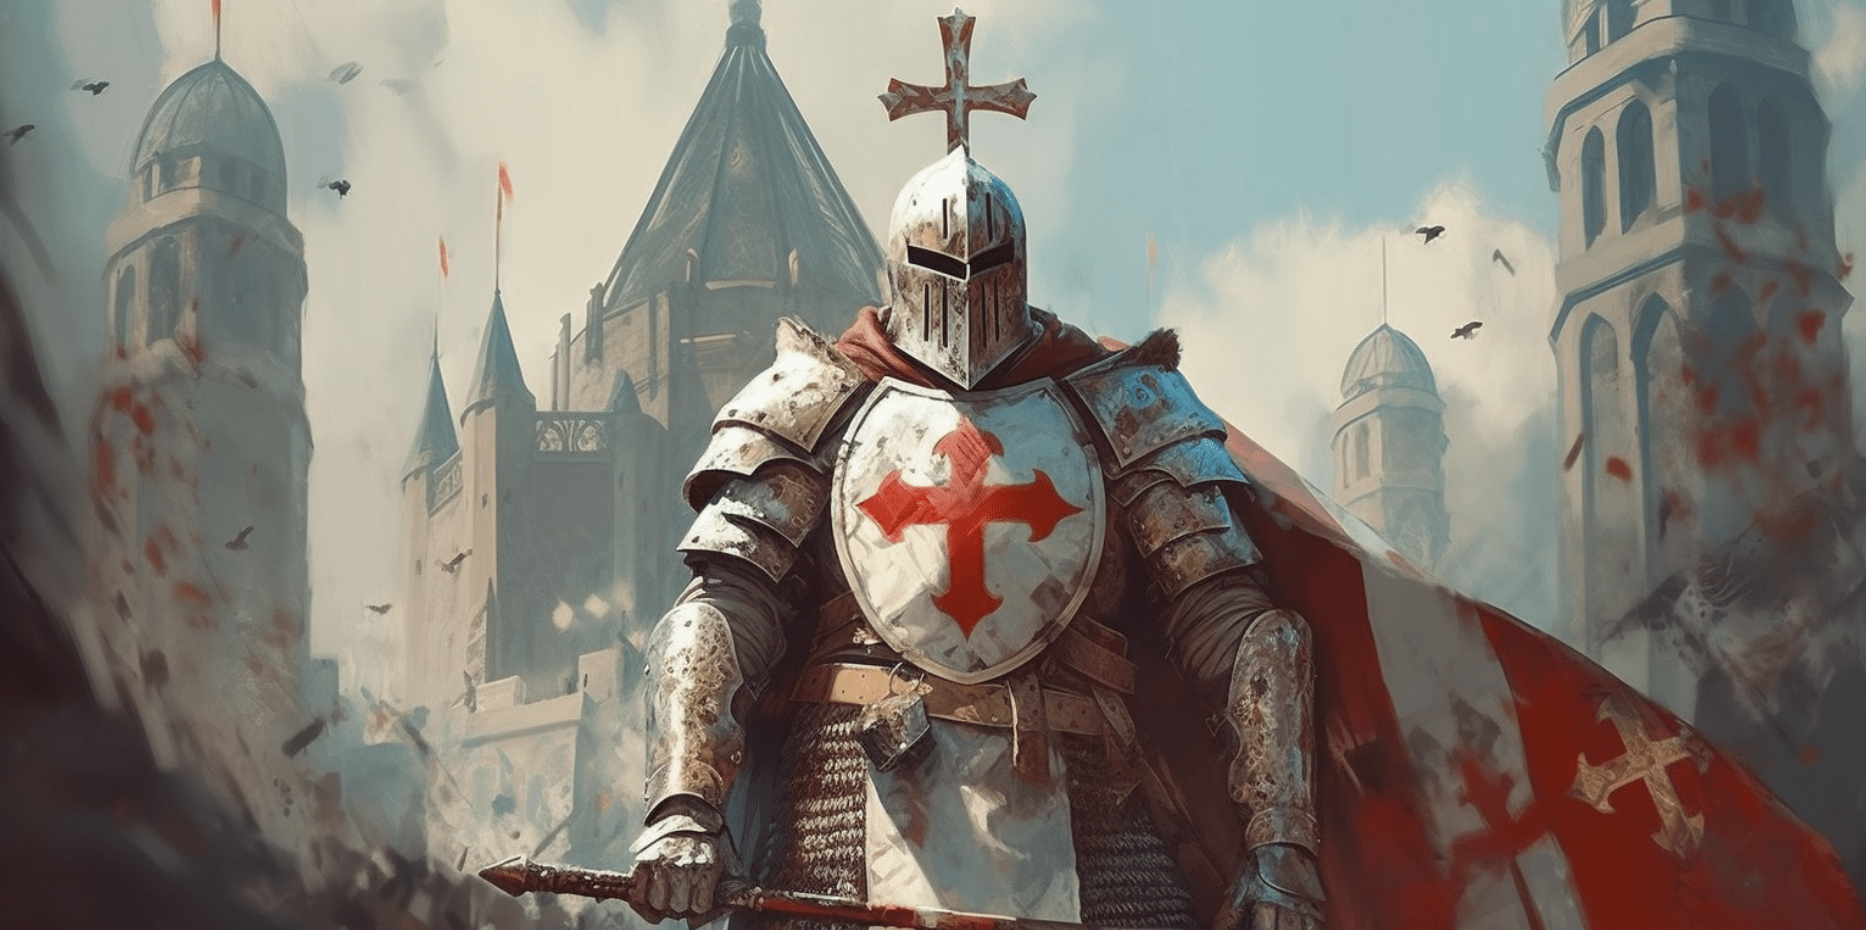 Jacques DeMolay, Grand Master of the Knights Templar, cursed a